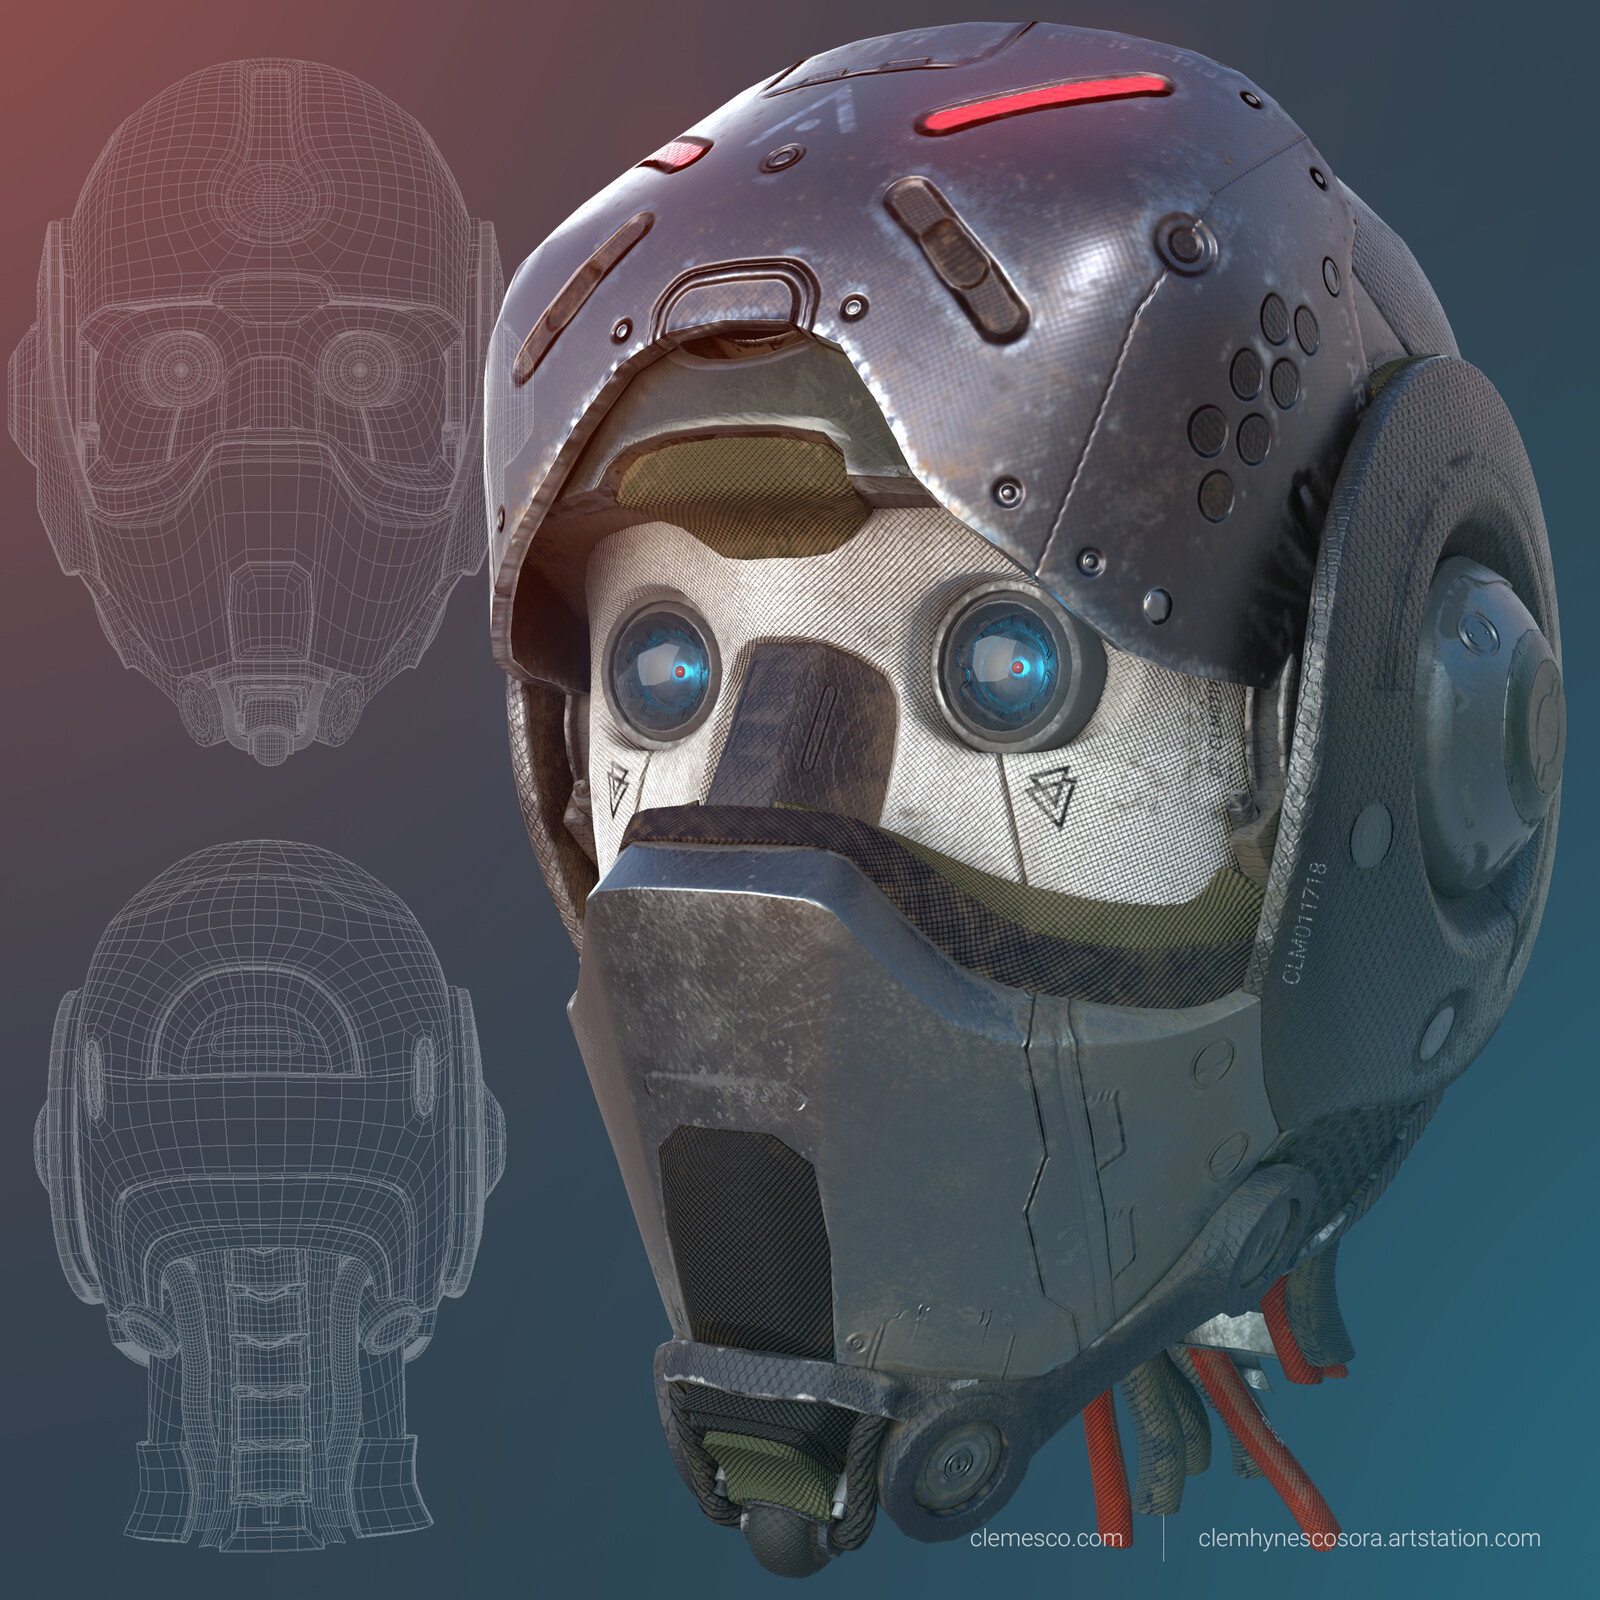 3d cg head concept for my android character. modeled in zbrush and maya. textured in substance painter. rendered with maya arnold.